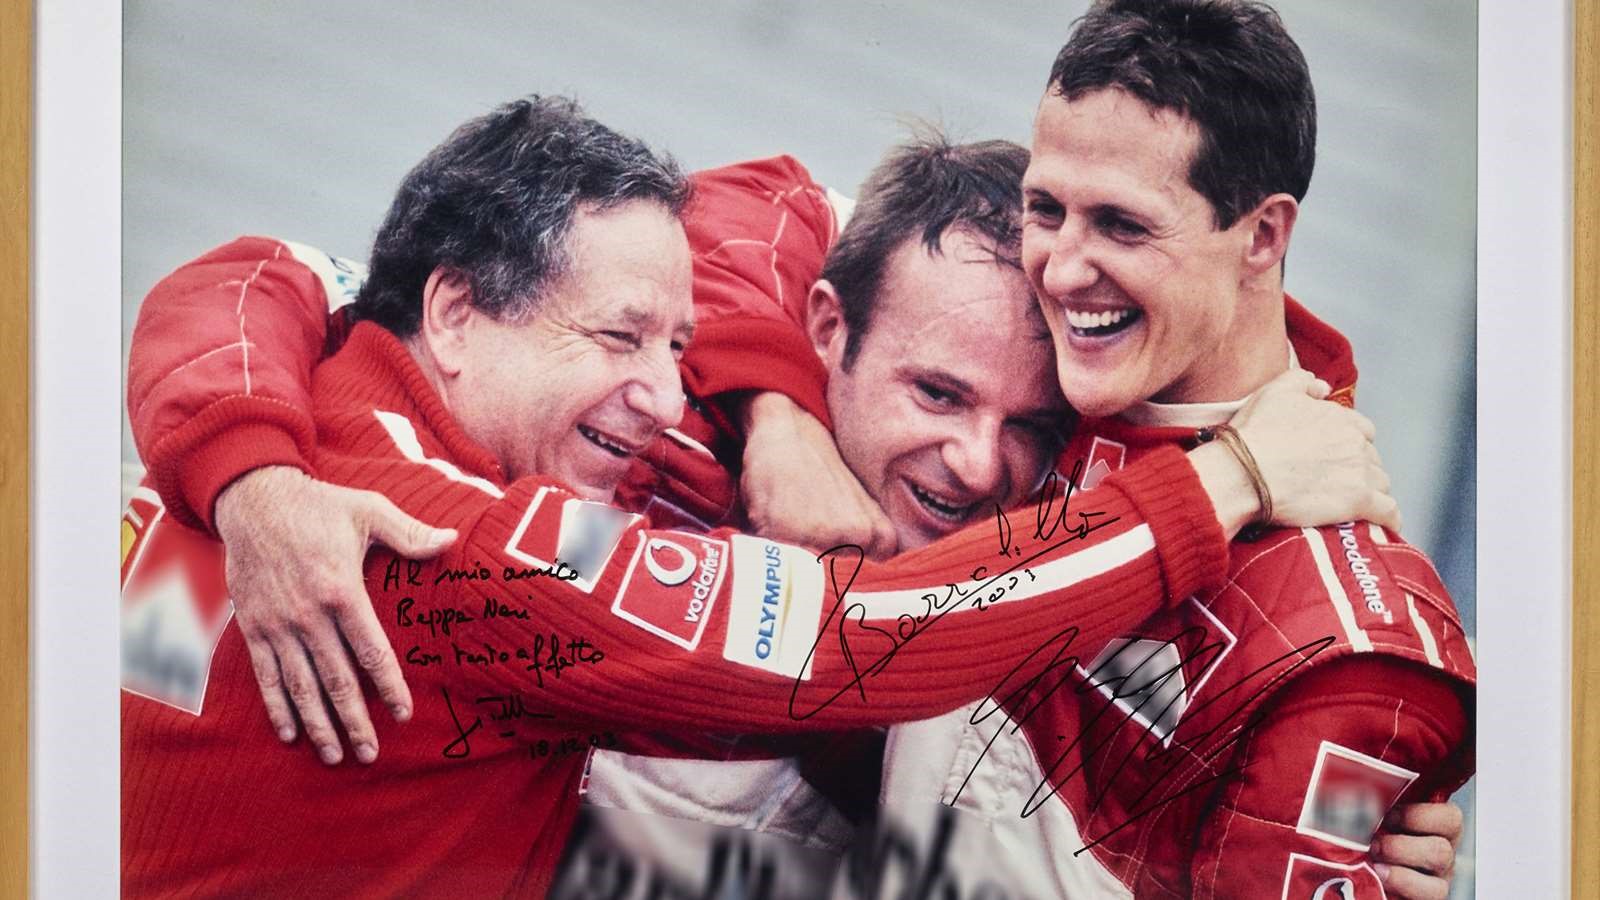 A painting with Jean Todt, Rubens Barrichello and Michael Schumacher.